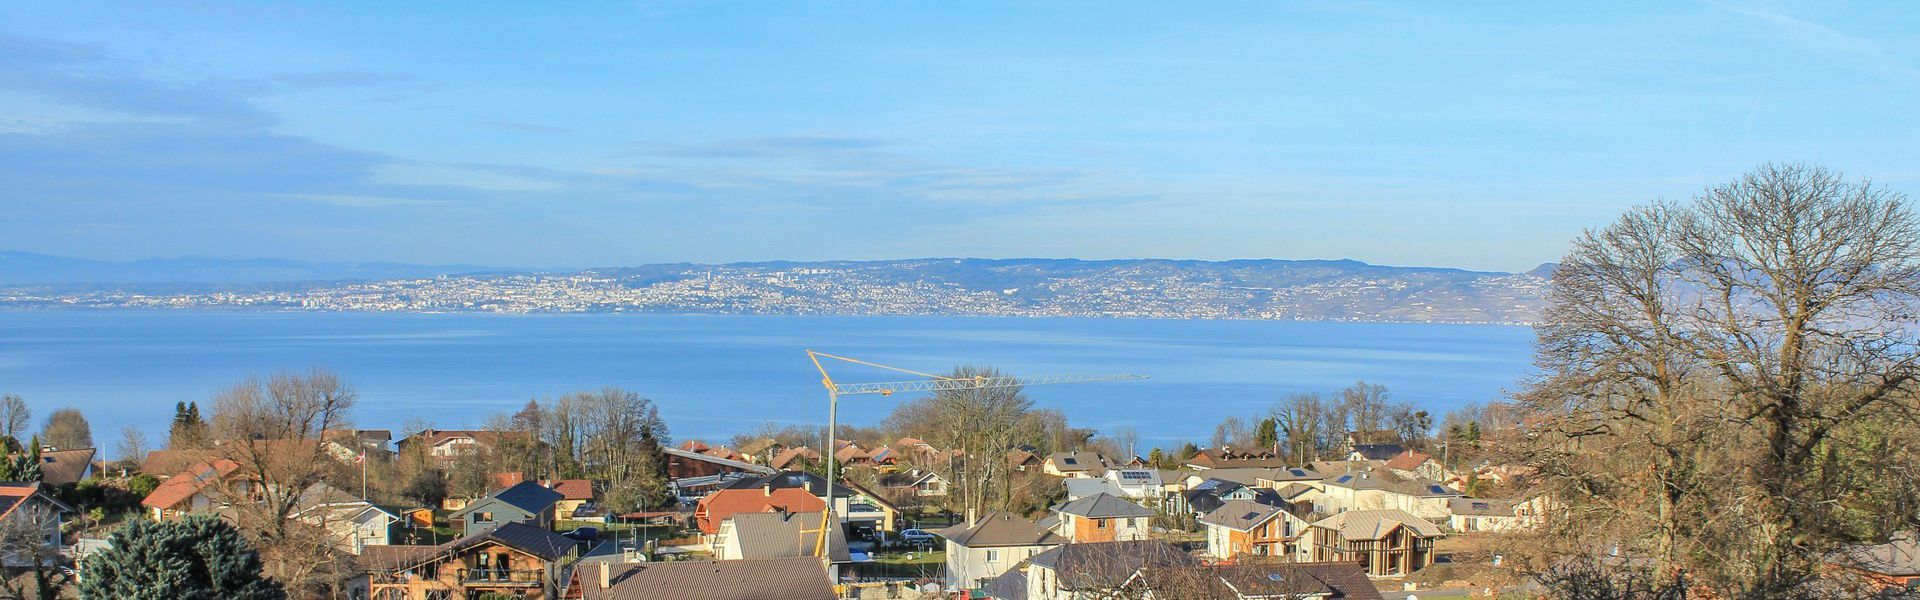 Maxilly-sur-Leman, a very lively town